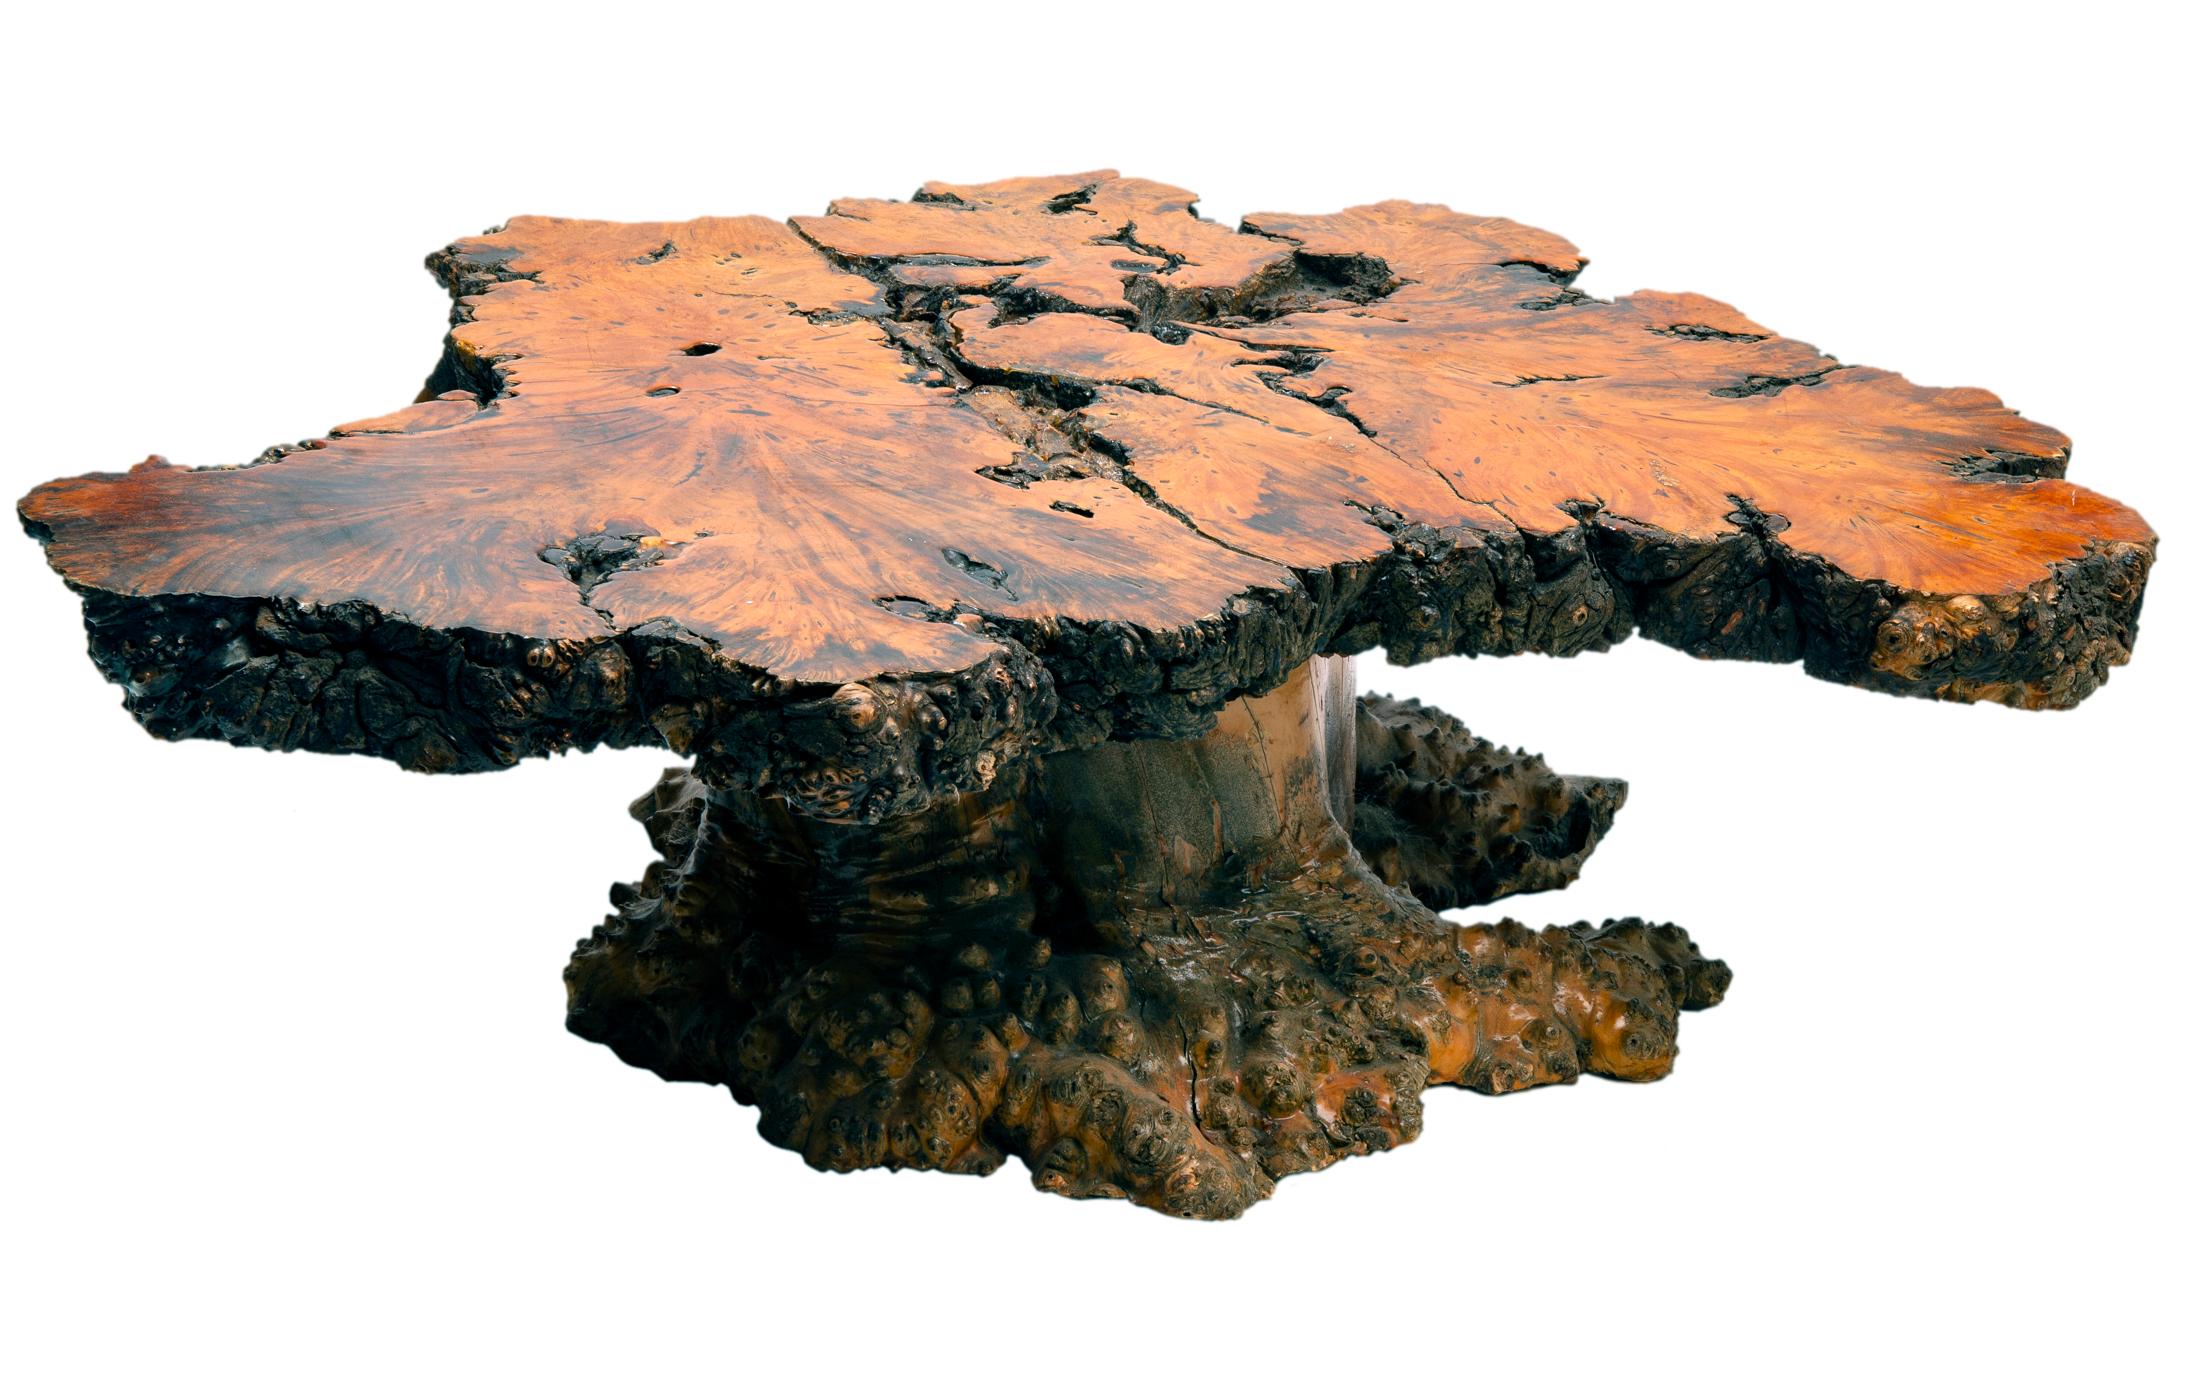 Burl wood is the product of irregular tree grain pattern growth. Such irregularities are caused due to an illness, a fungus infection, or natural injury. The tree’s grain will grow abnormally, twisting and interlocking with itself. During this